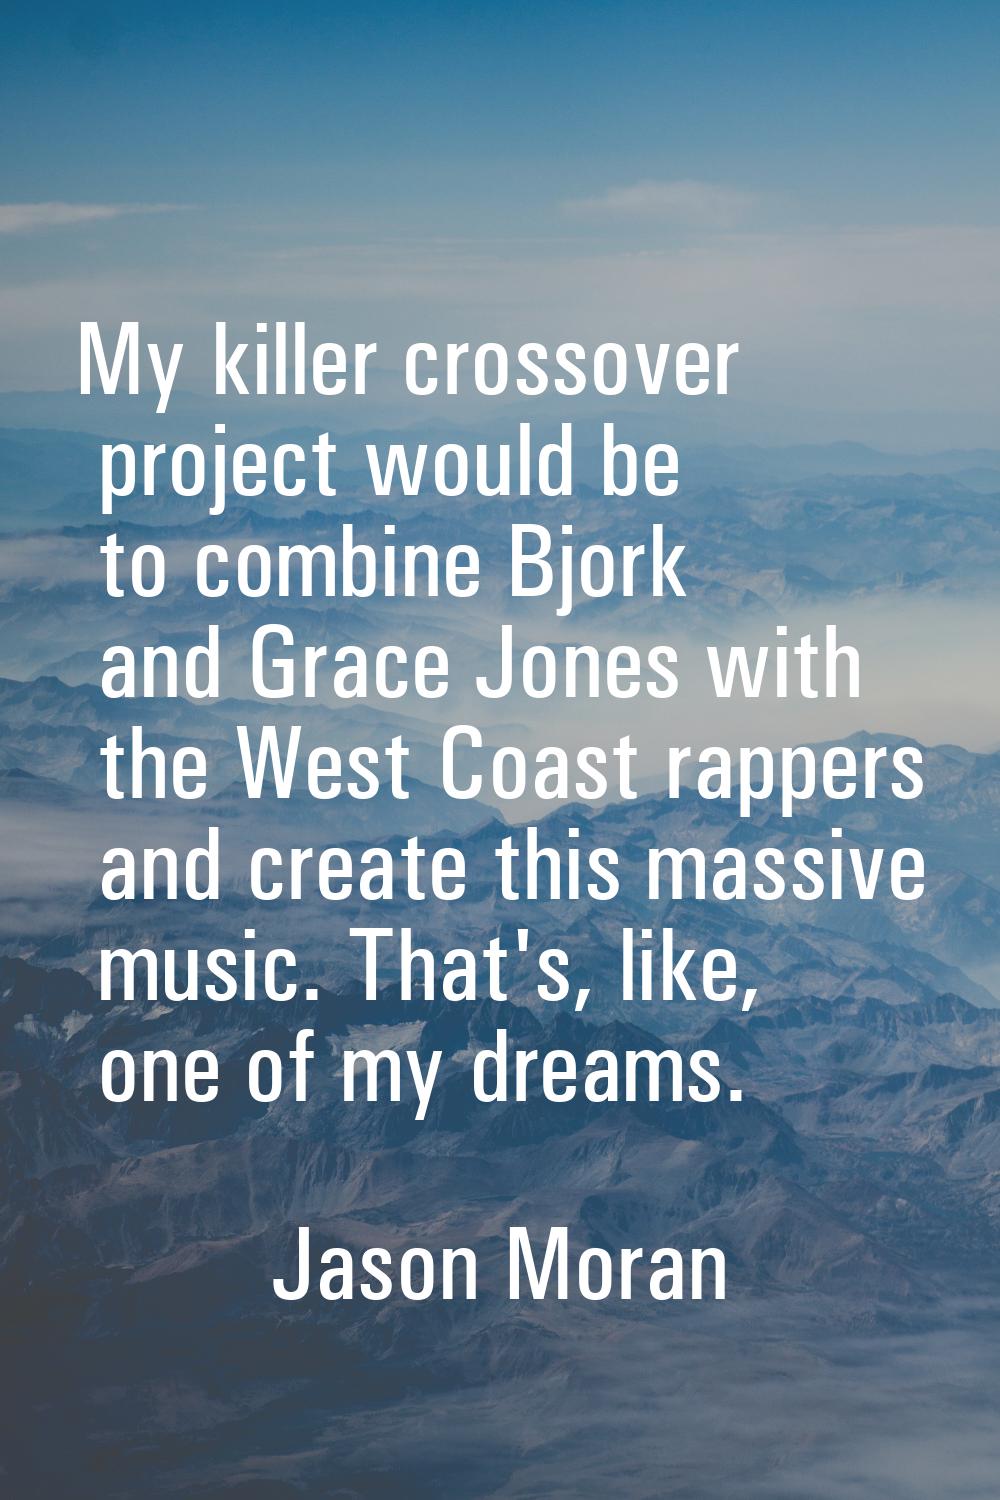 My killer crossover project would be to combine Bjork and Grace Jones with the West Coast rappers a